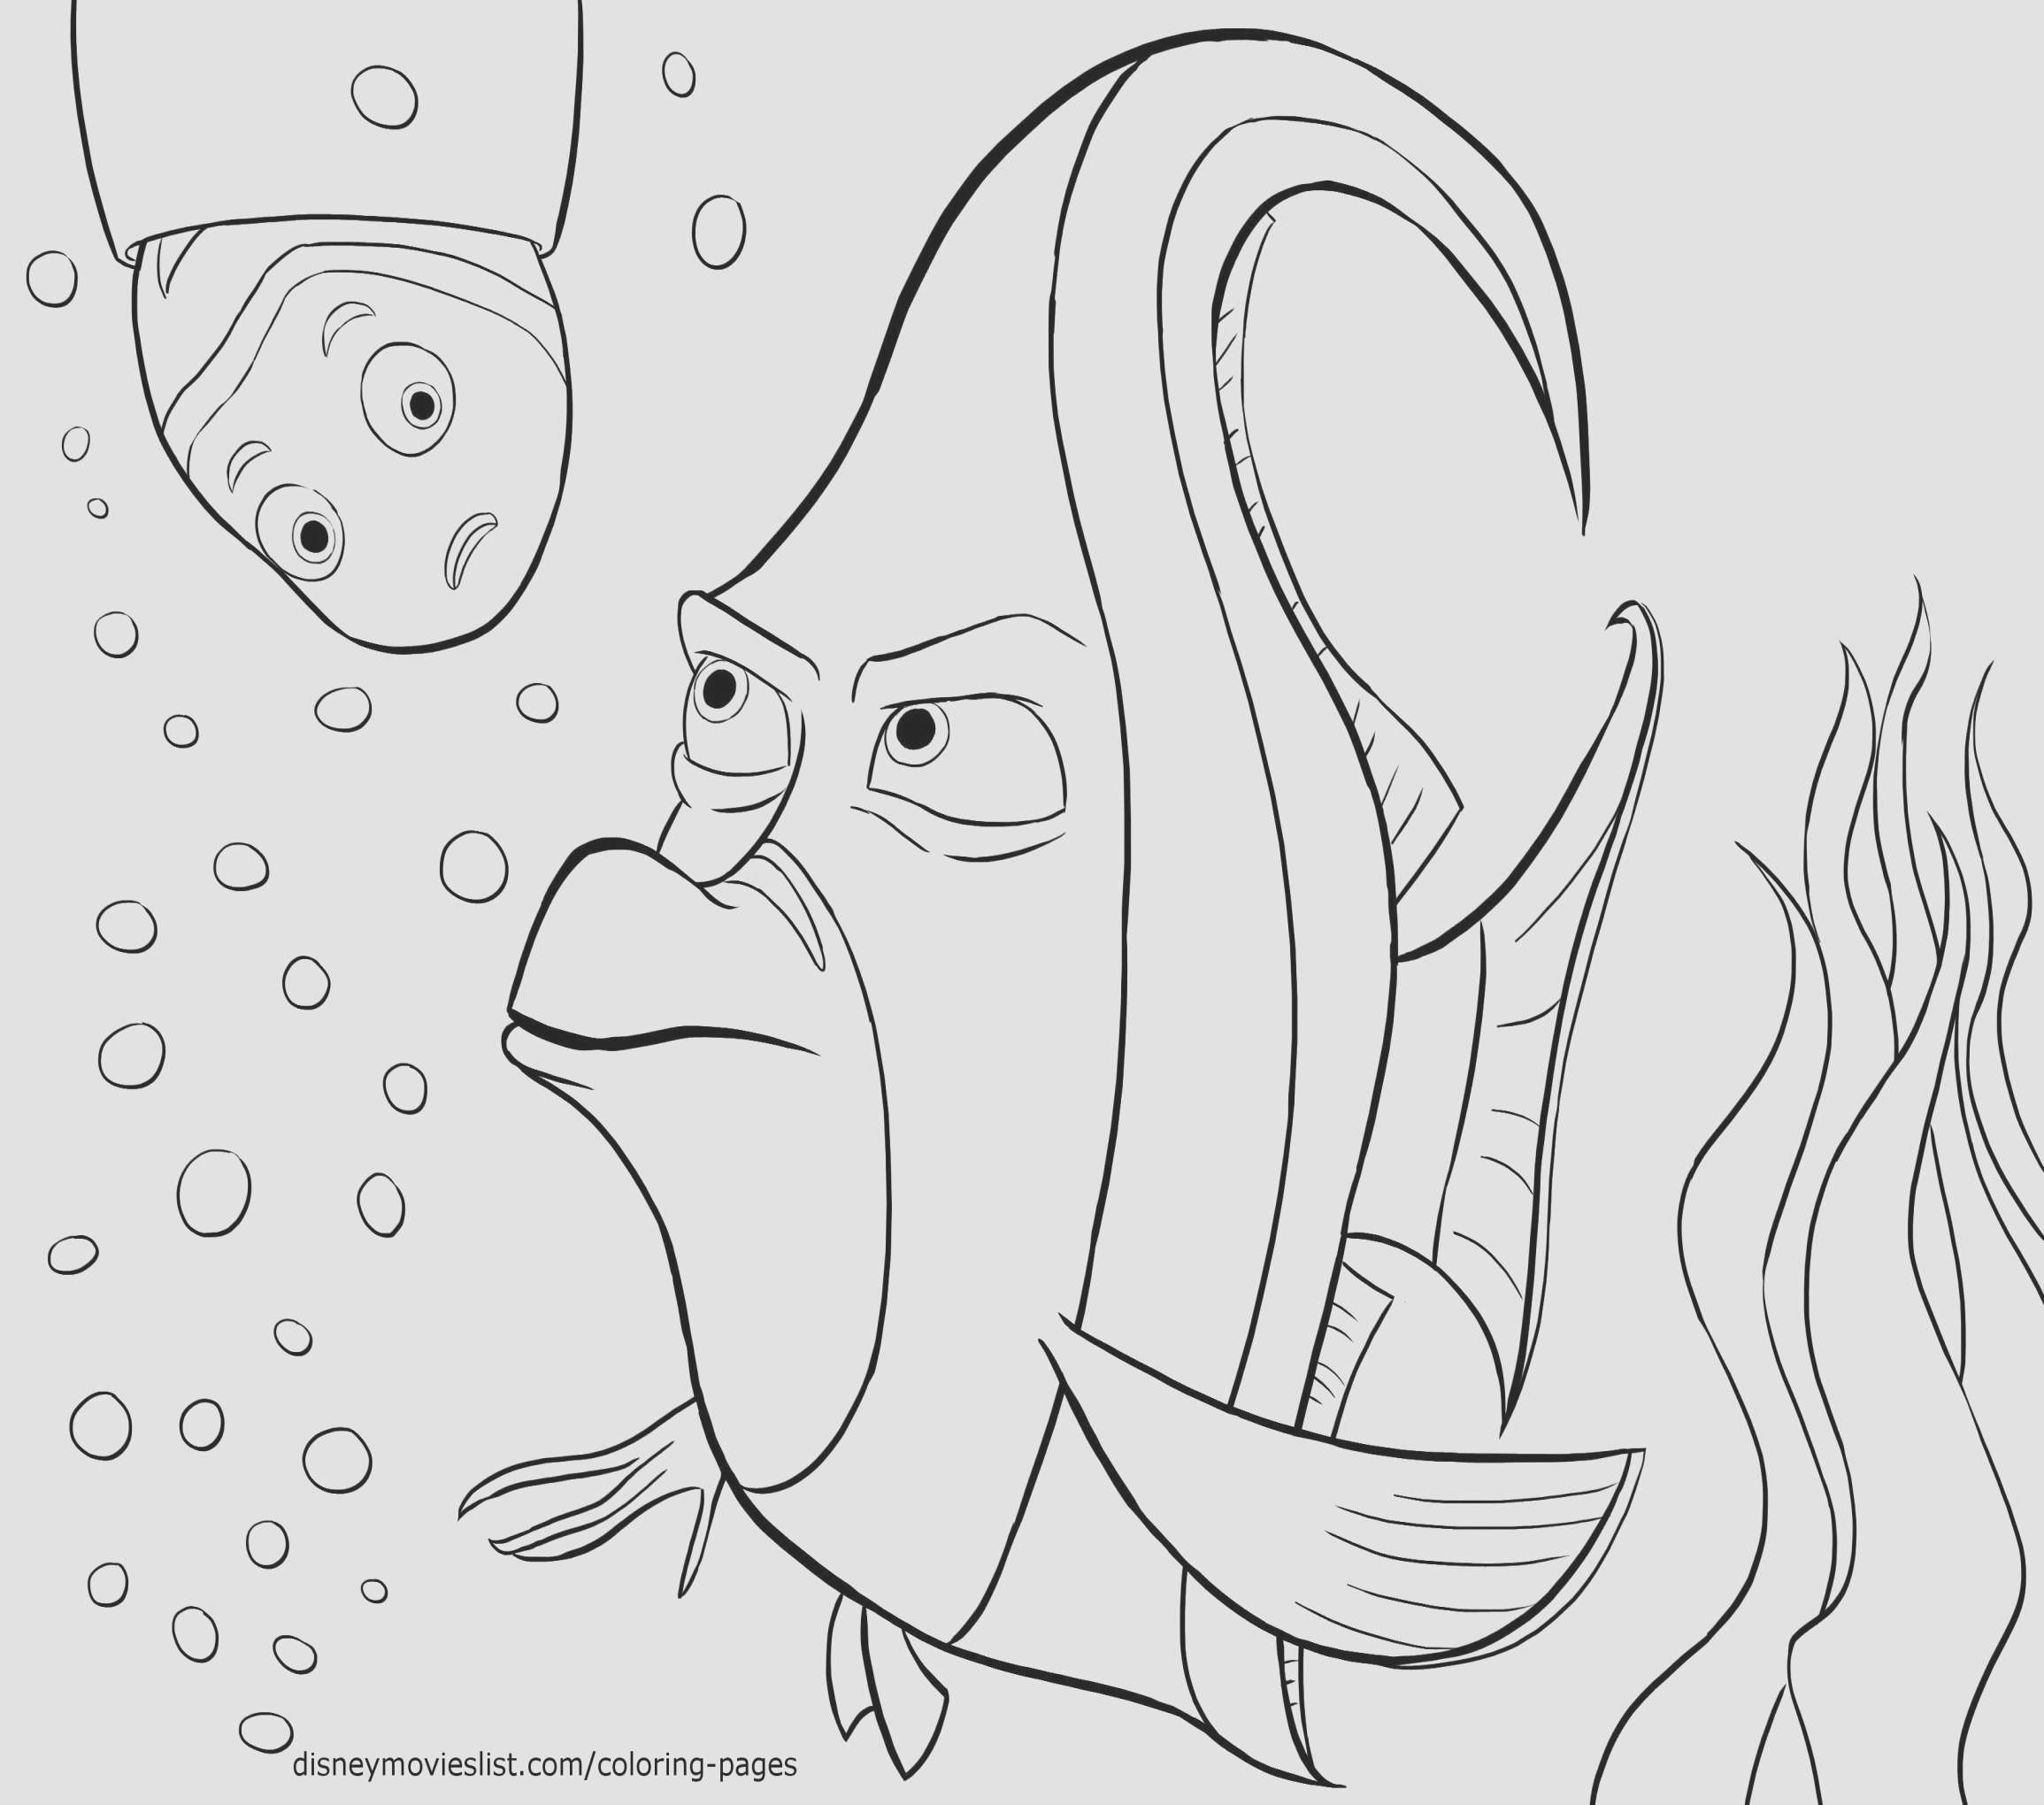 Finding Nemo Characters Coloring Pages Best Friend Coloring Pages Rises Meilleures Finding Nemo Characters